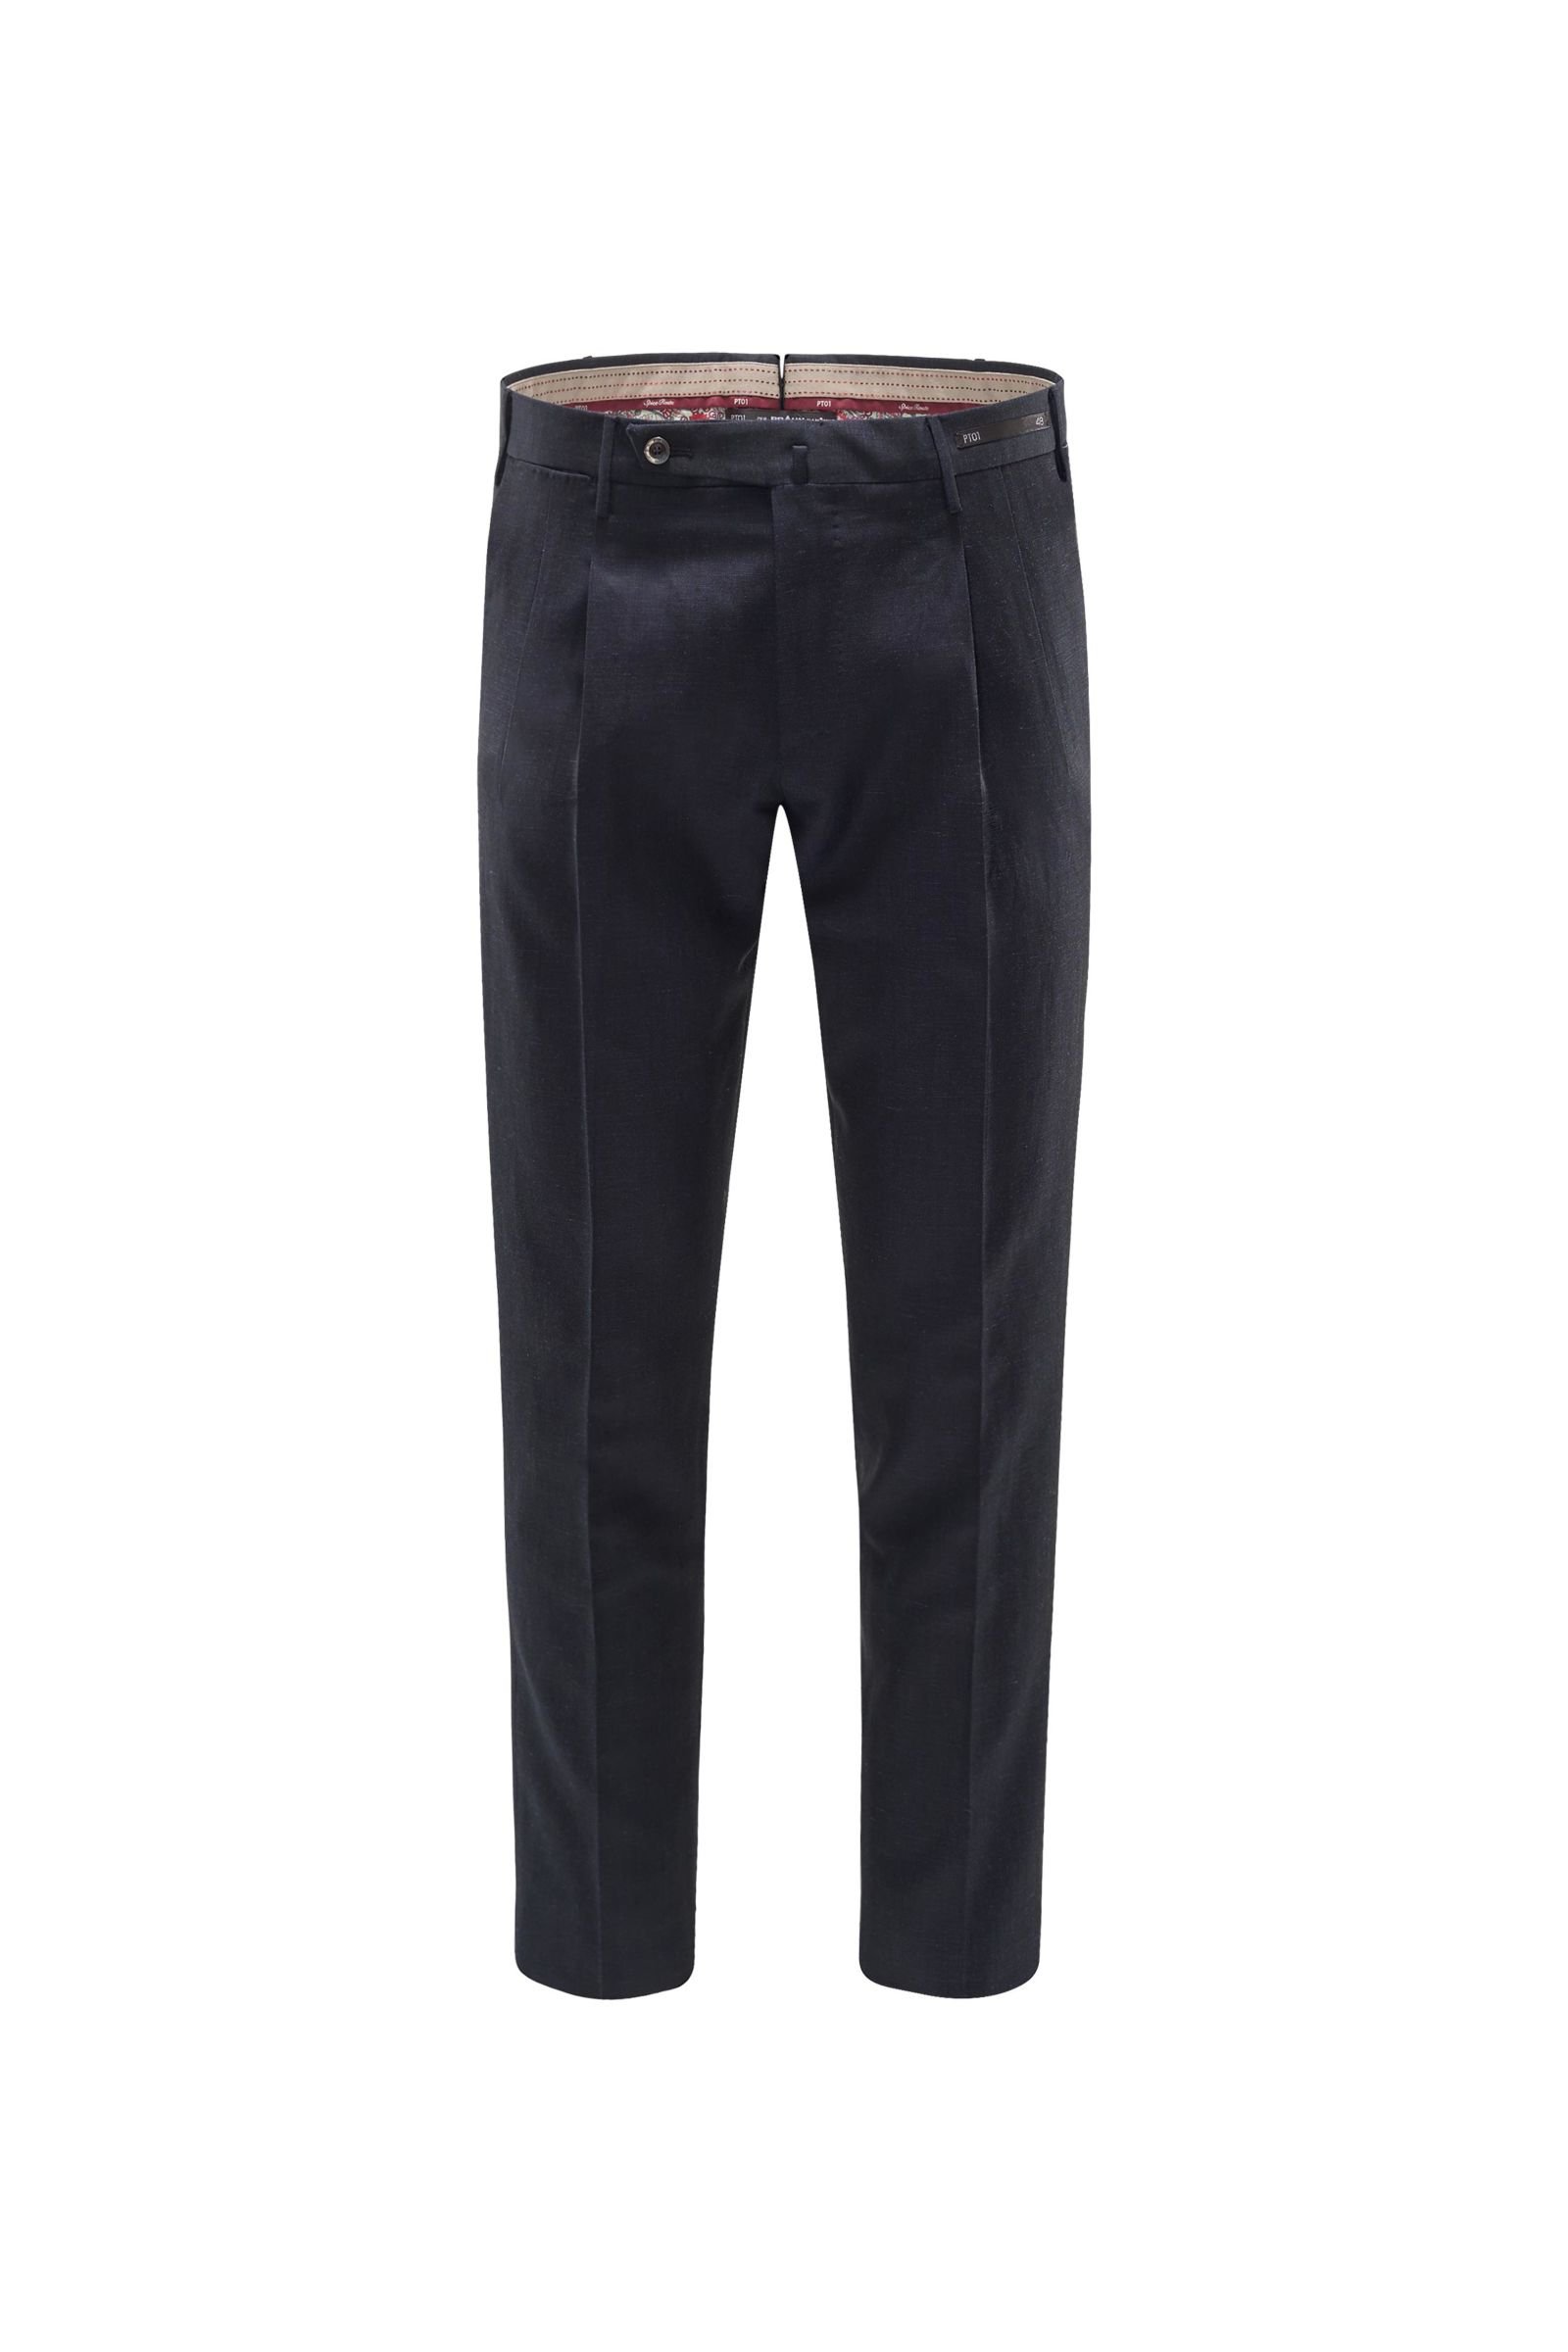 Chambray trousers 'Spice Route Preppy Fit' dark blue